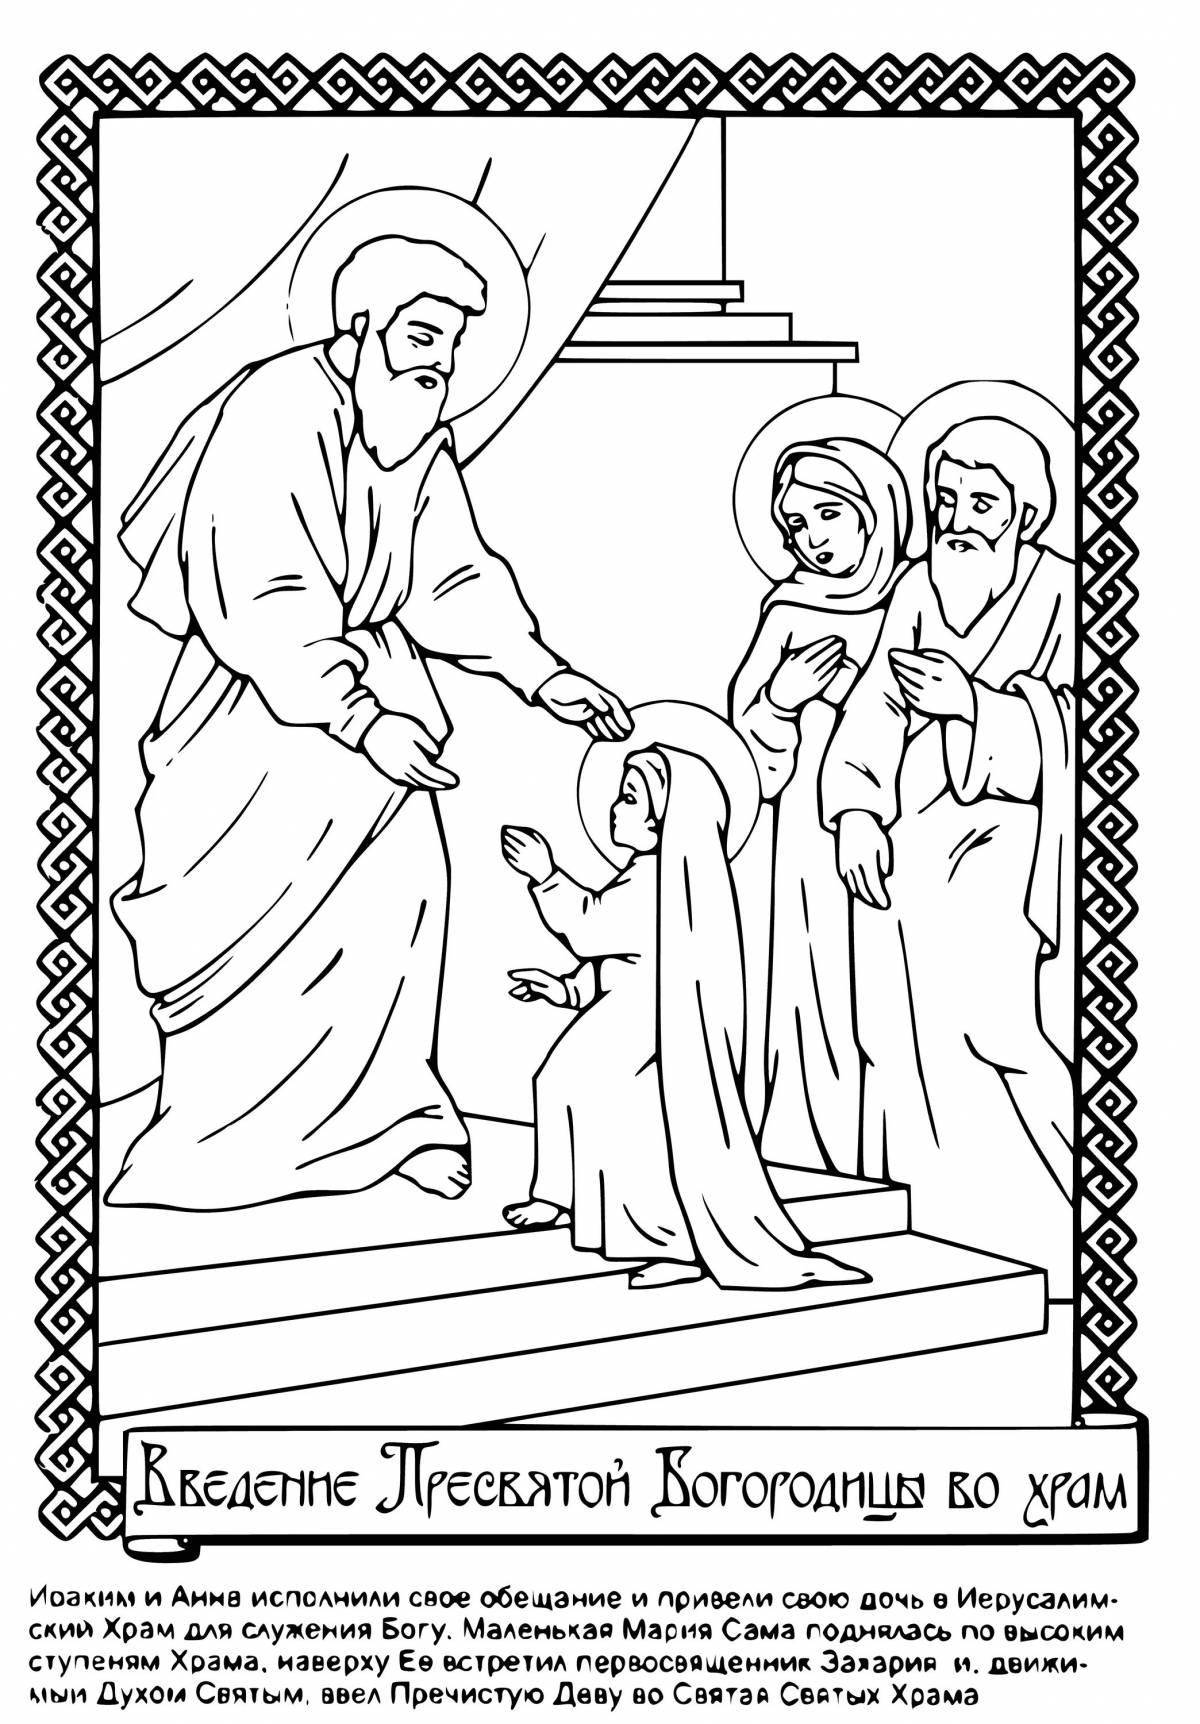 Exquisite orthodox holiday coloring book